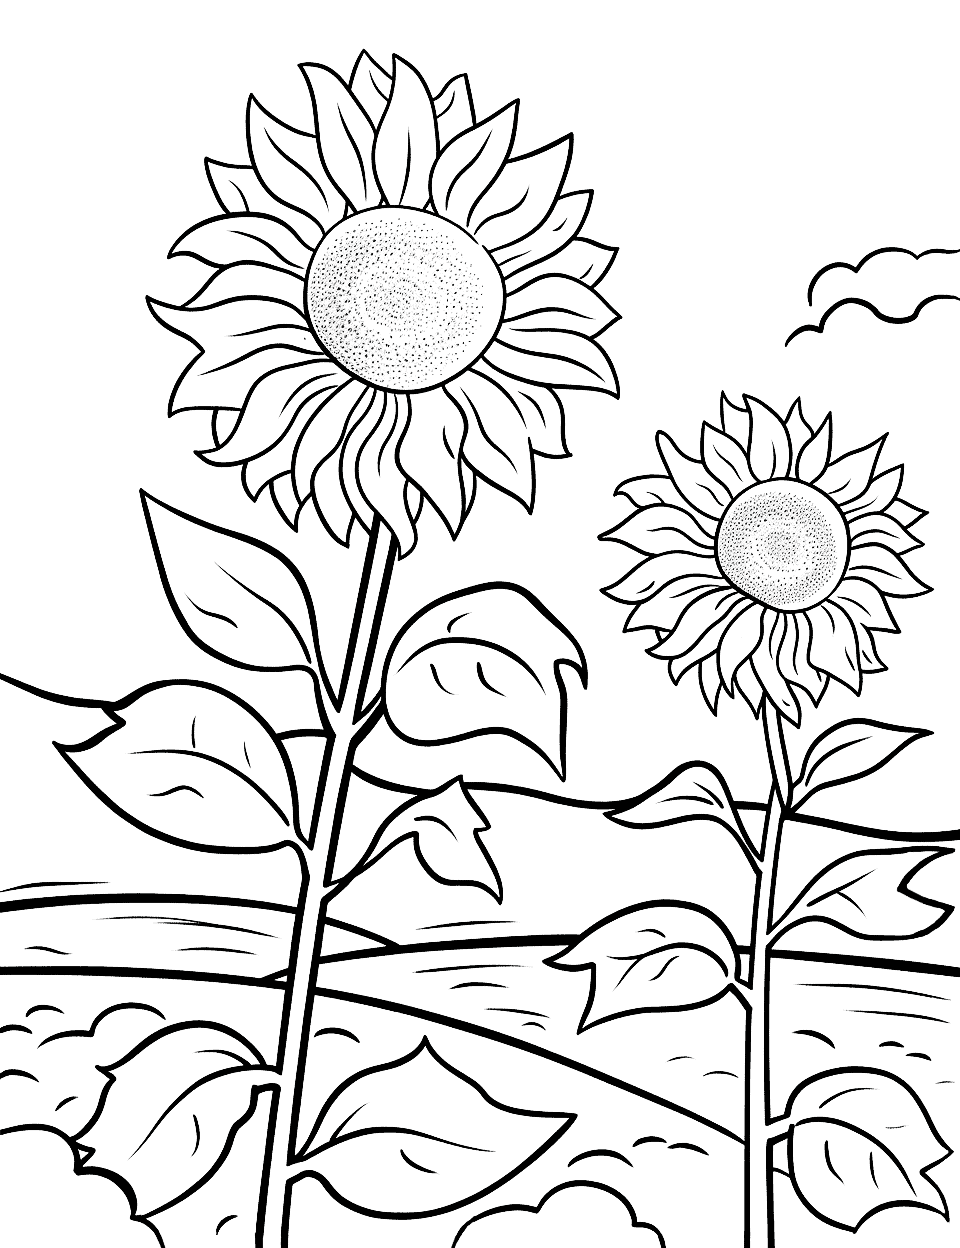 Simple Sunflower Field Summer Coloring Page - A simple coloring page for young kids featuring a field full of blooming sunflowers under a bright sun.